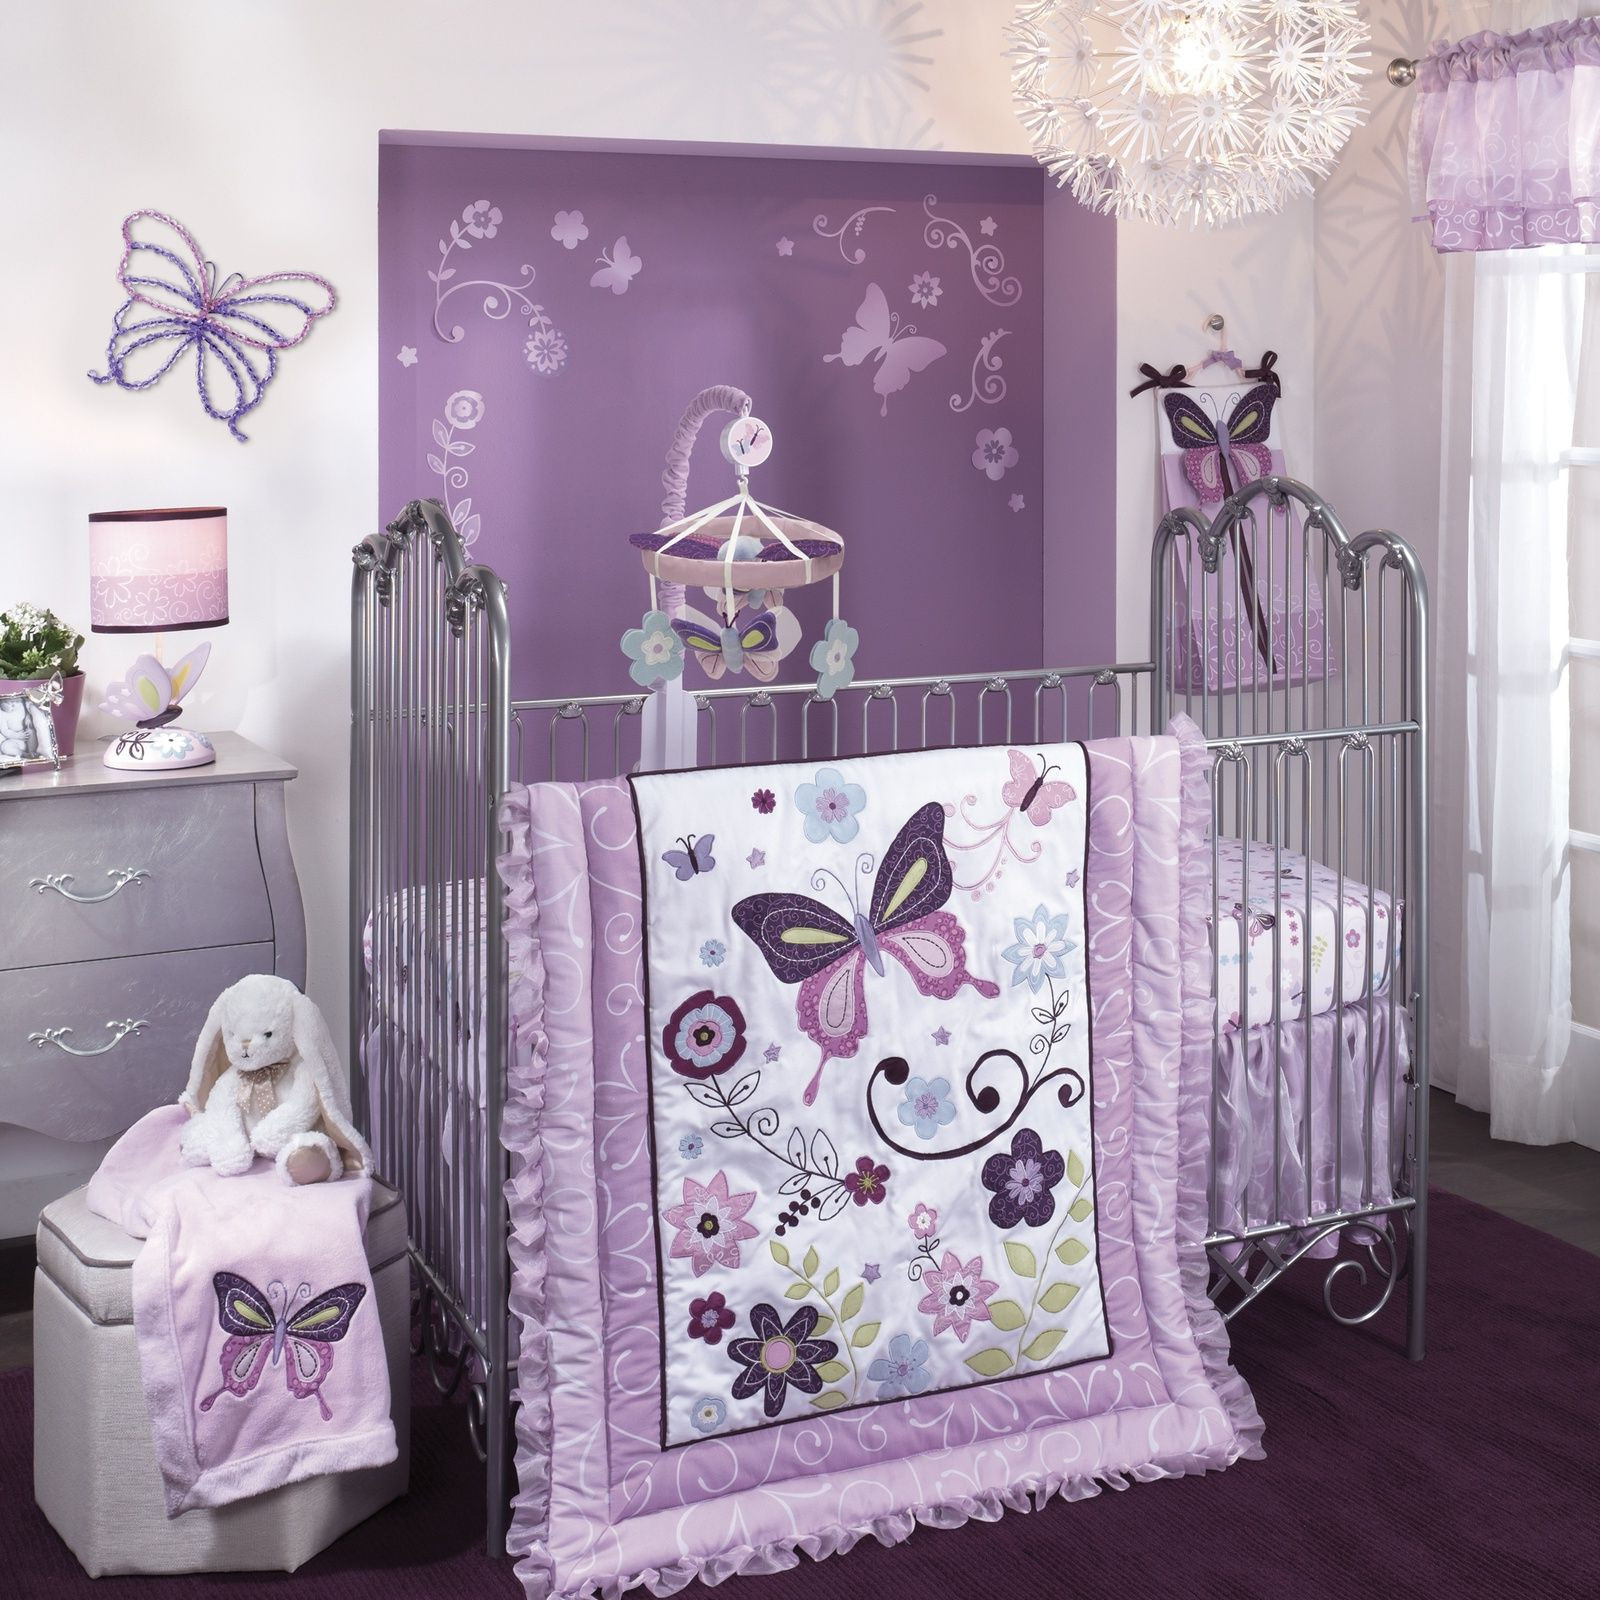 Purple Baby Room Decor
 Bedroom Captivating Nursery Themes For Girls With Cute